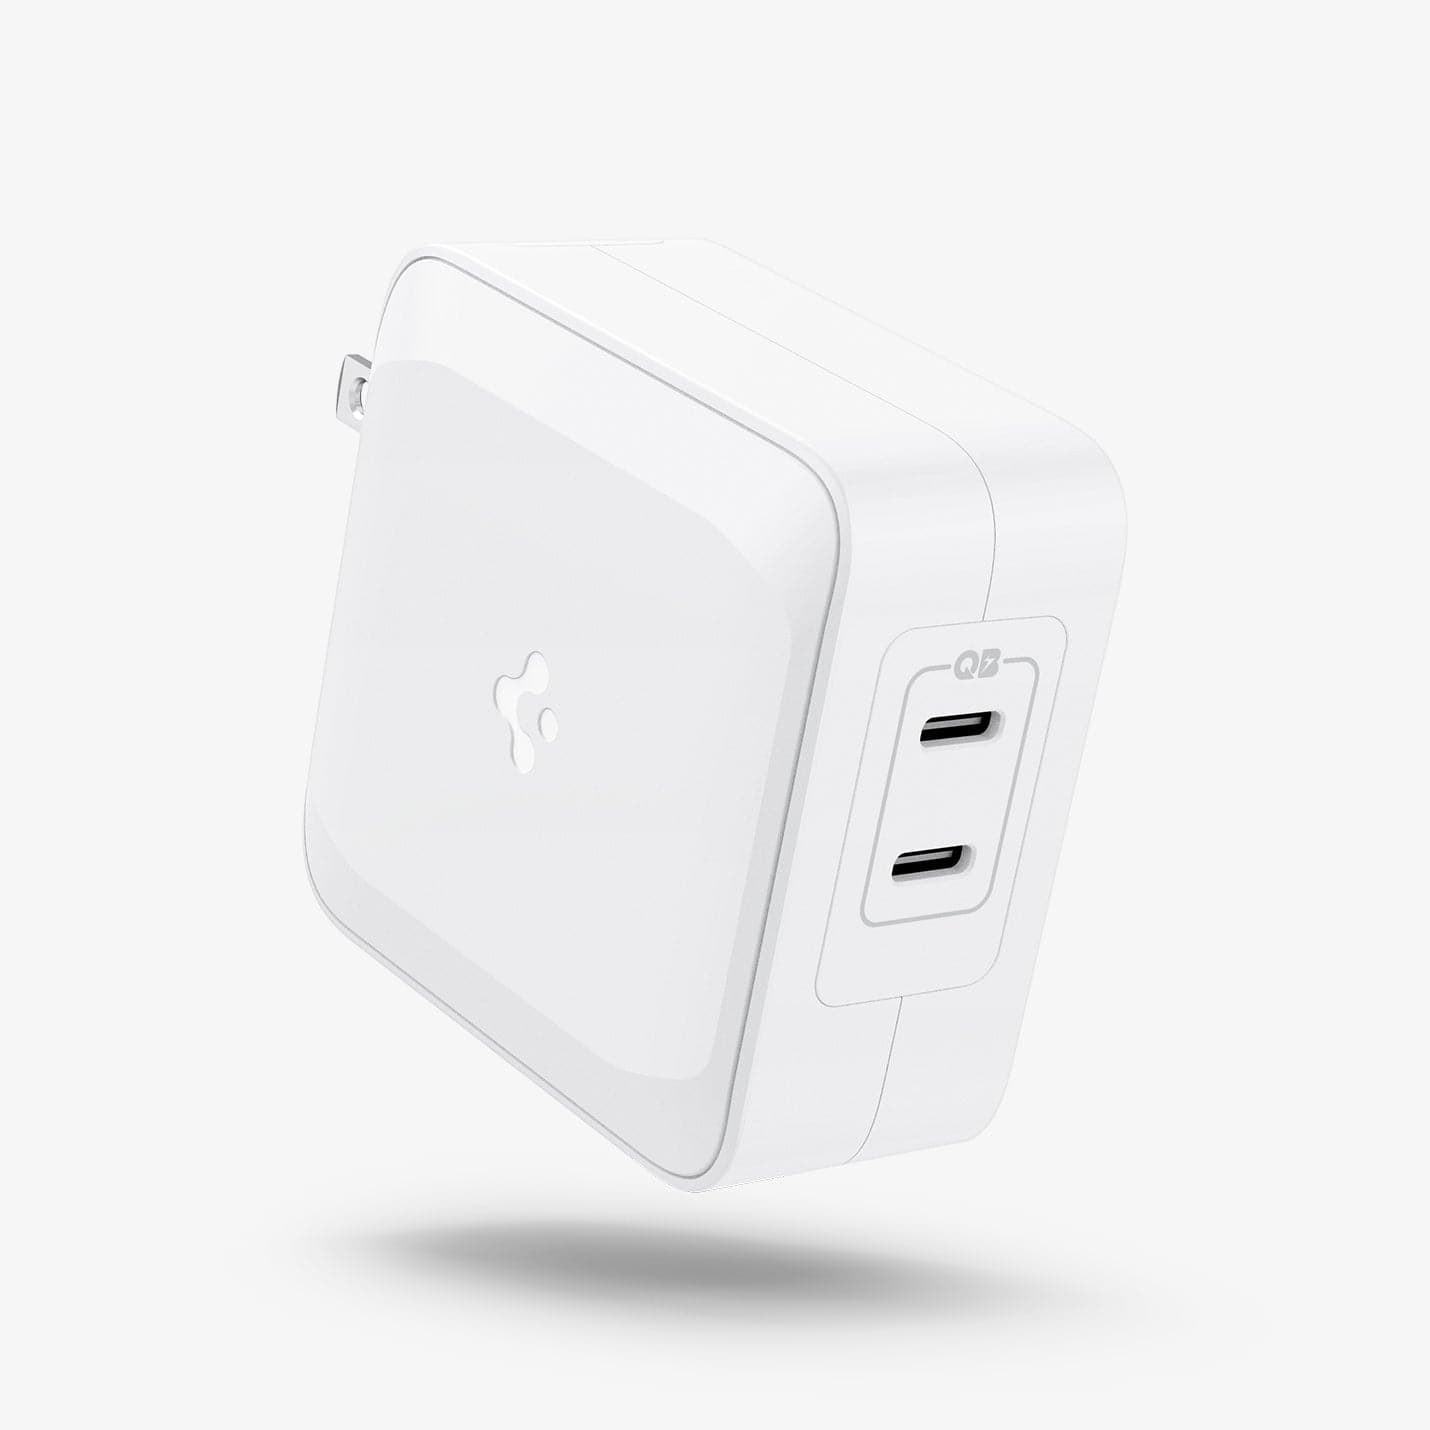 ACH02122 - ArcStation™ Pro 100W Wall Charger PE2006 in white showing the front and side